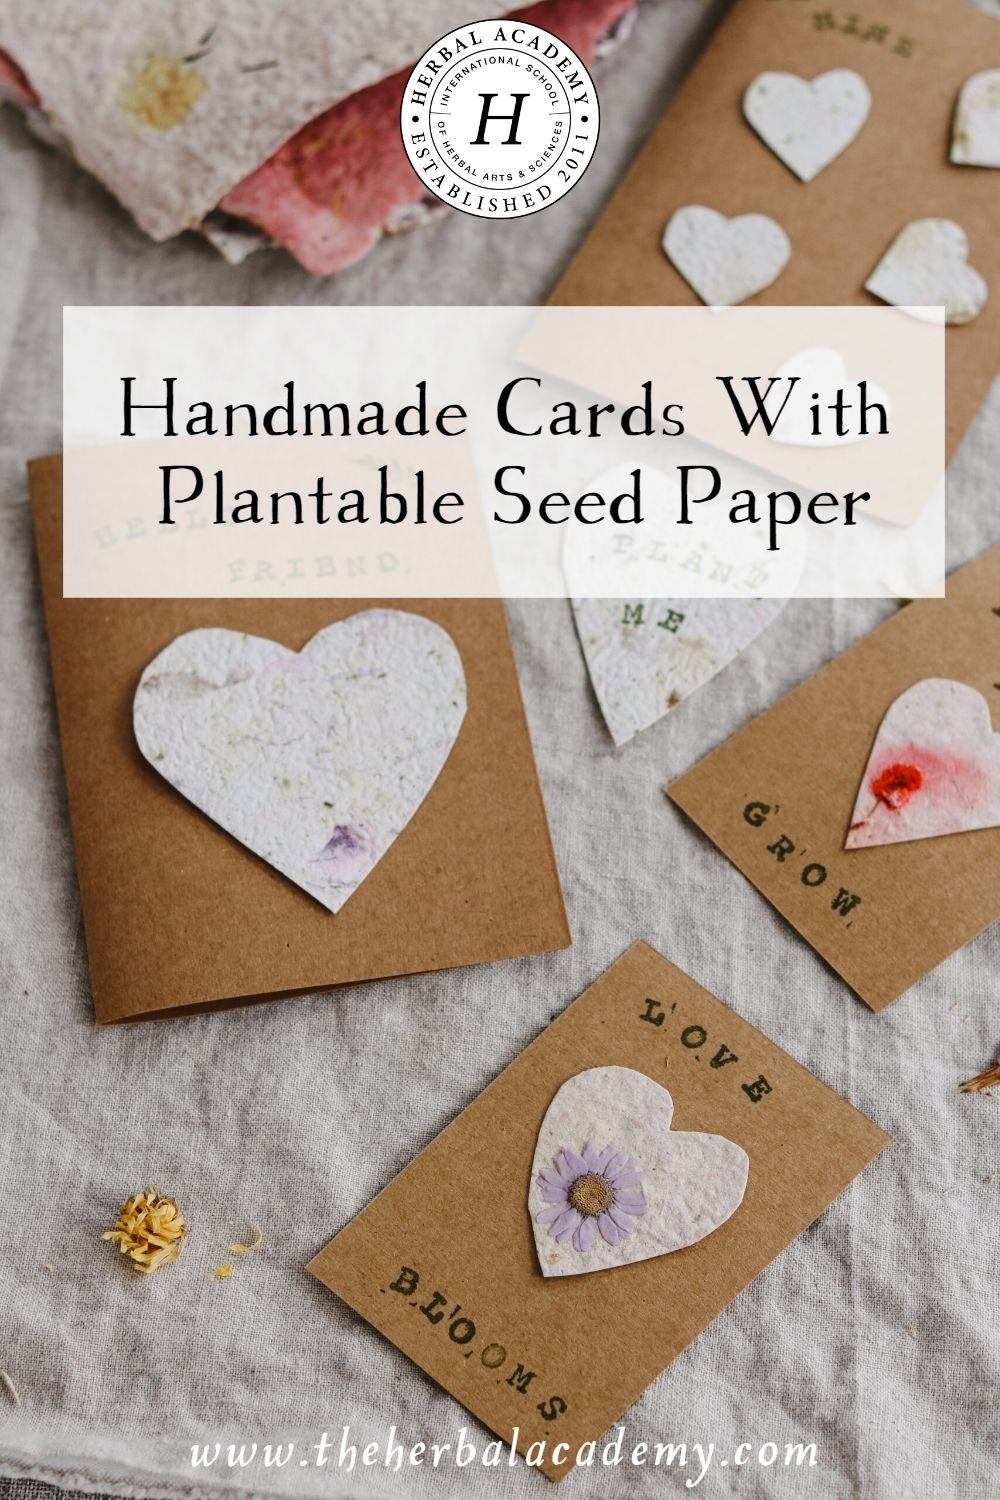 Handmade Cards With Plantable Seed Paper | Herbal Academy | Send greetings with plantable seed paper to demonstrate the beauty of sustainable creativity and make your expressions of love truly unique.